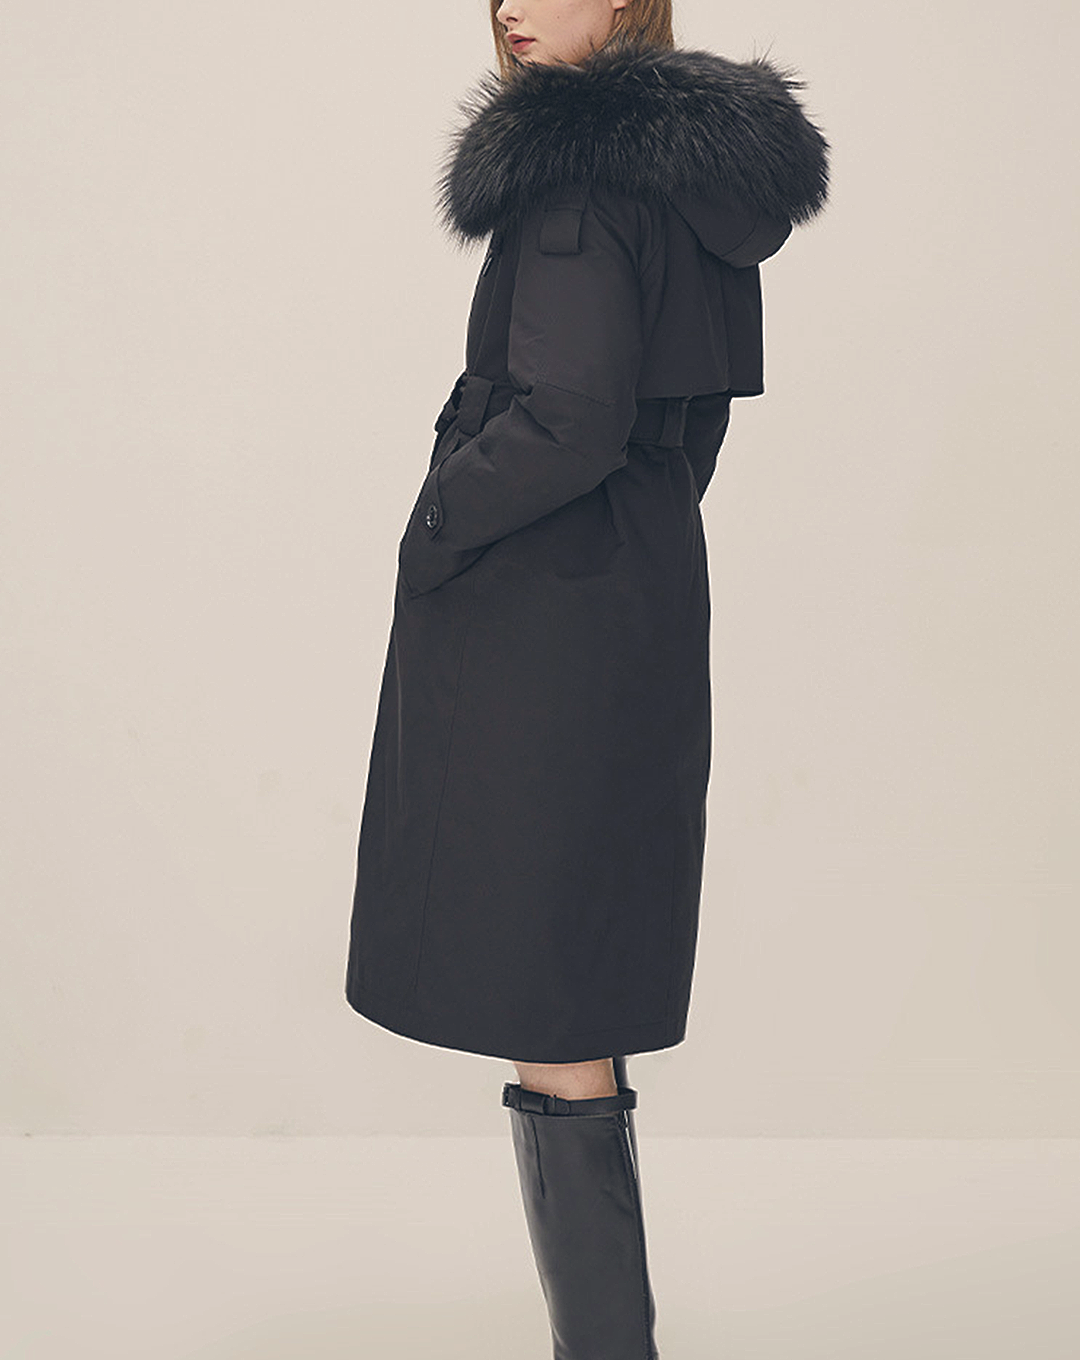 ♀Fur Hooded Trench Coat